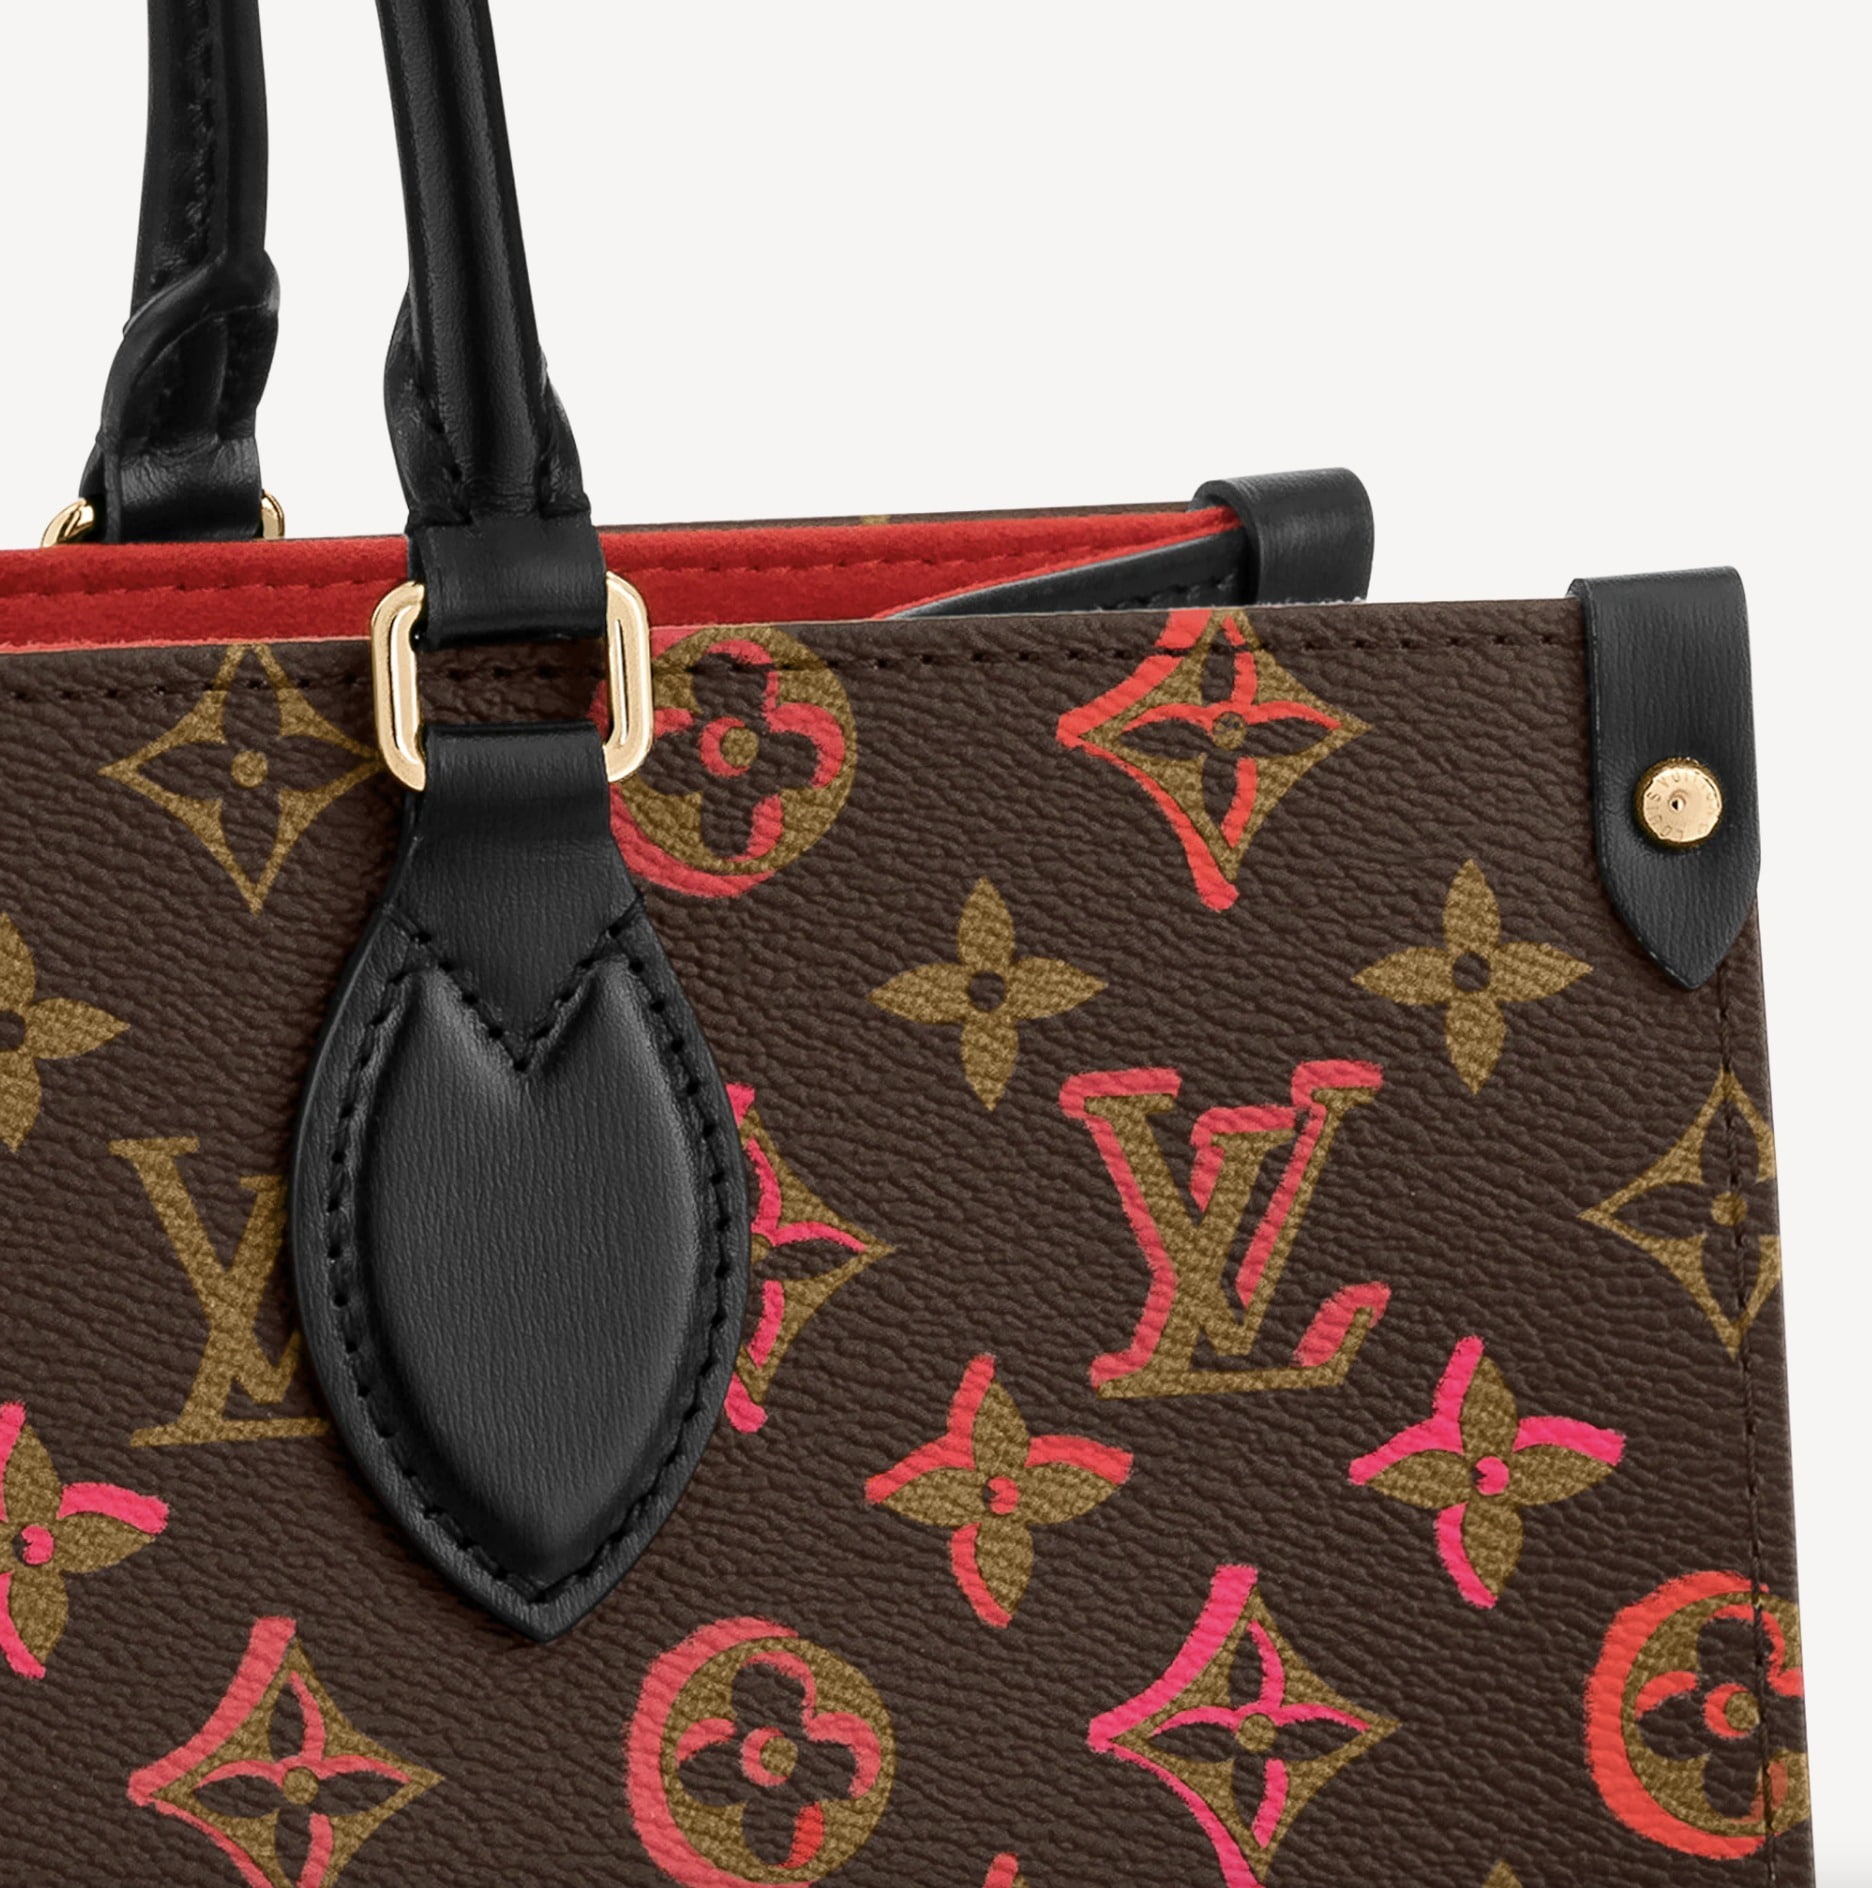 TÚI XÁCH LOUIS VUITTON LV TOTE ONTHEGO LIMITED EDITION FALL IN LOVE MONOGRAM CANVAS MM 3